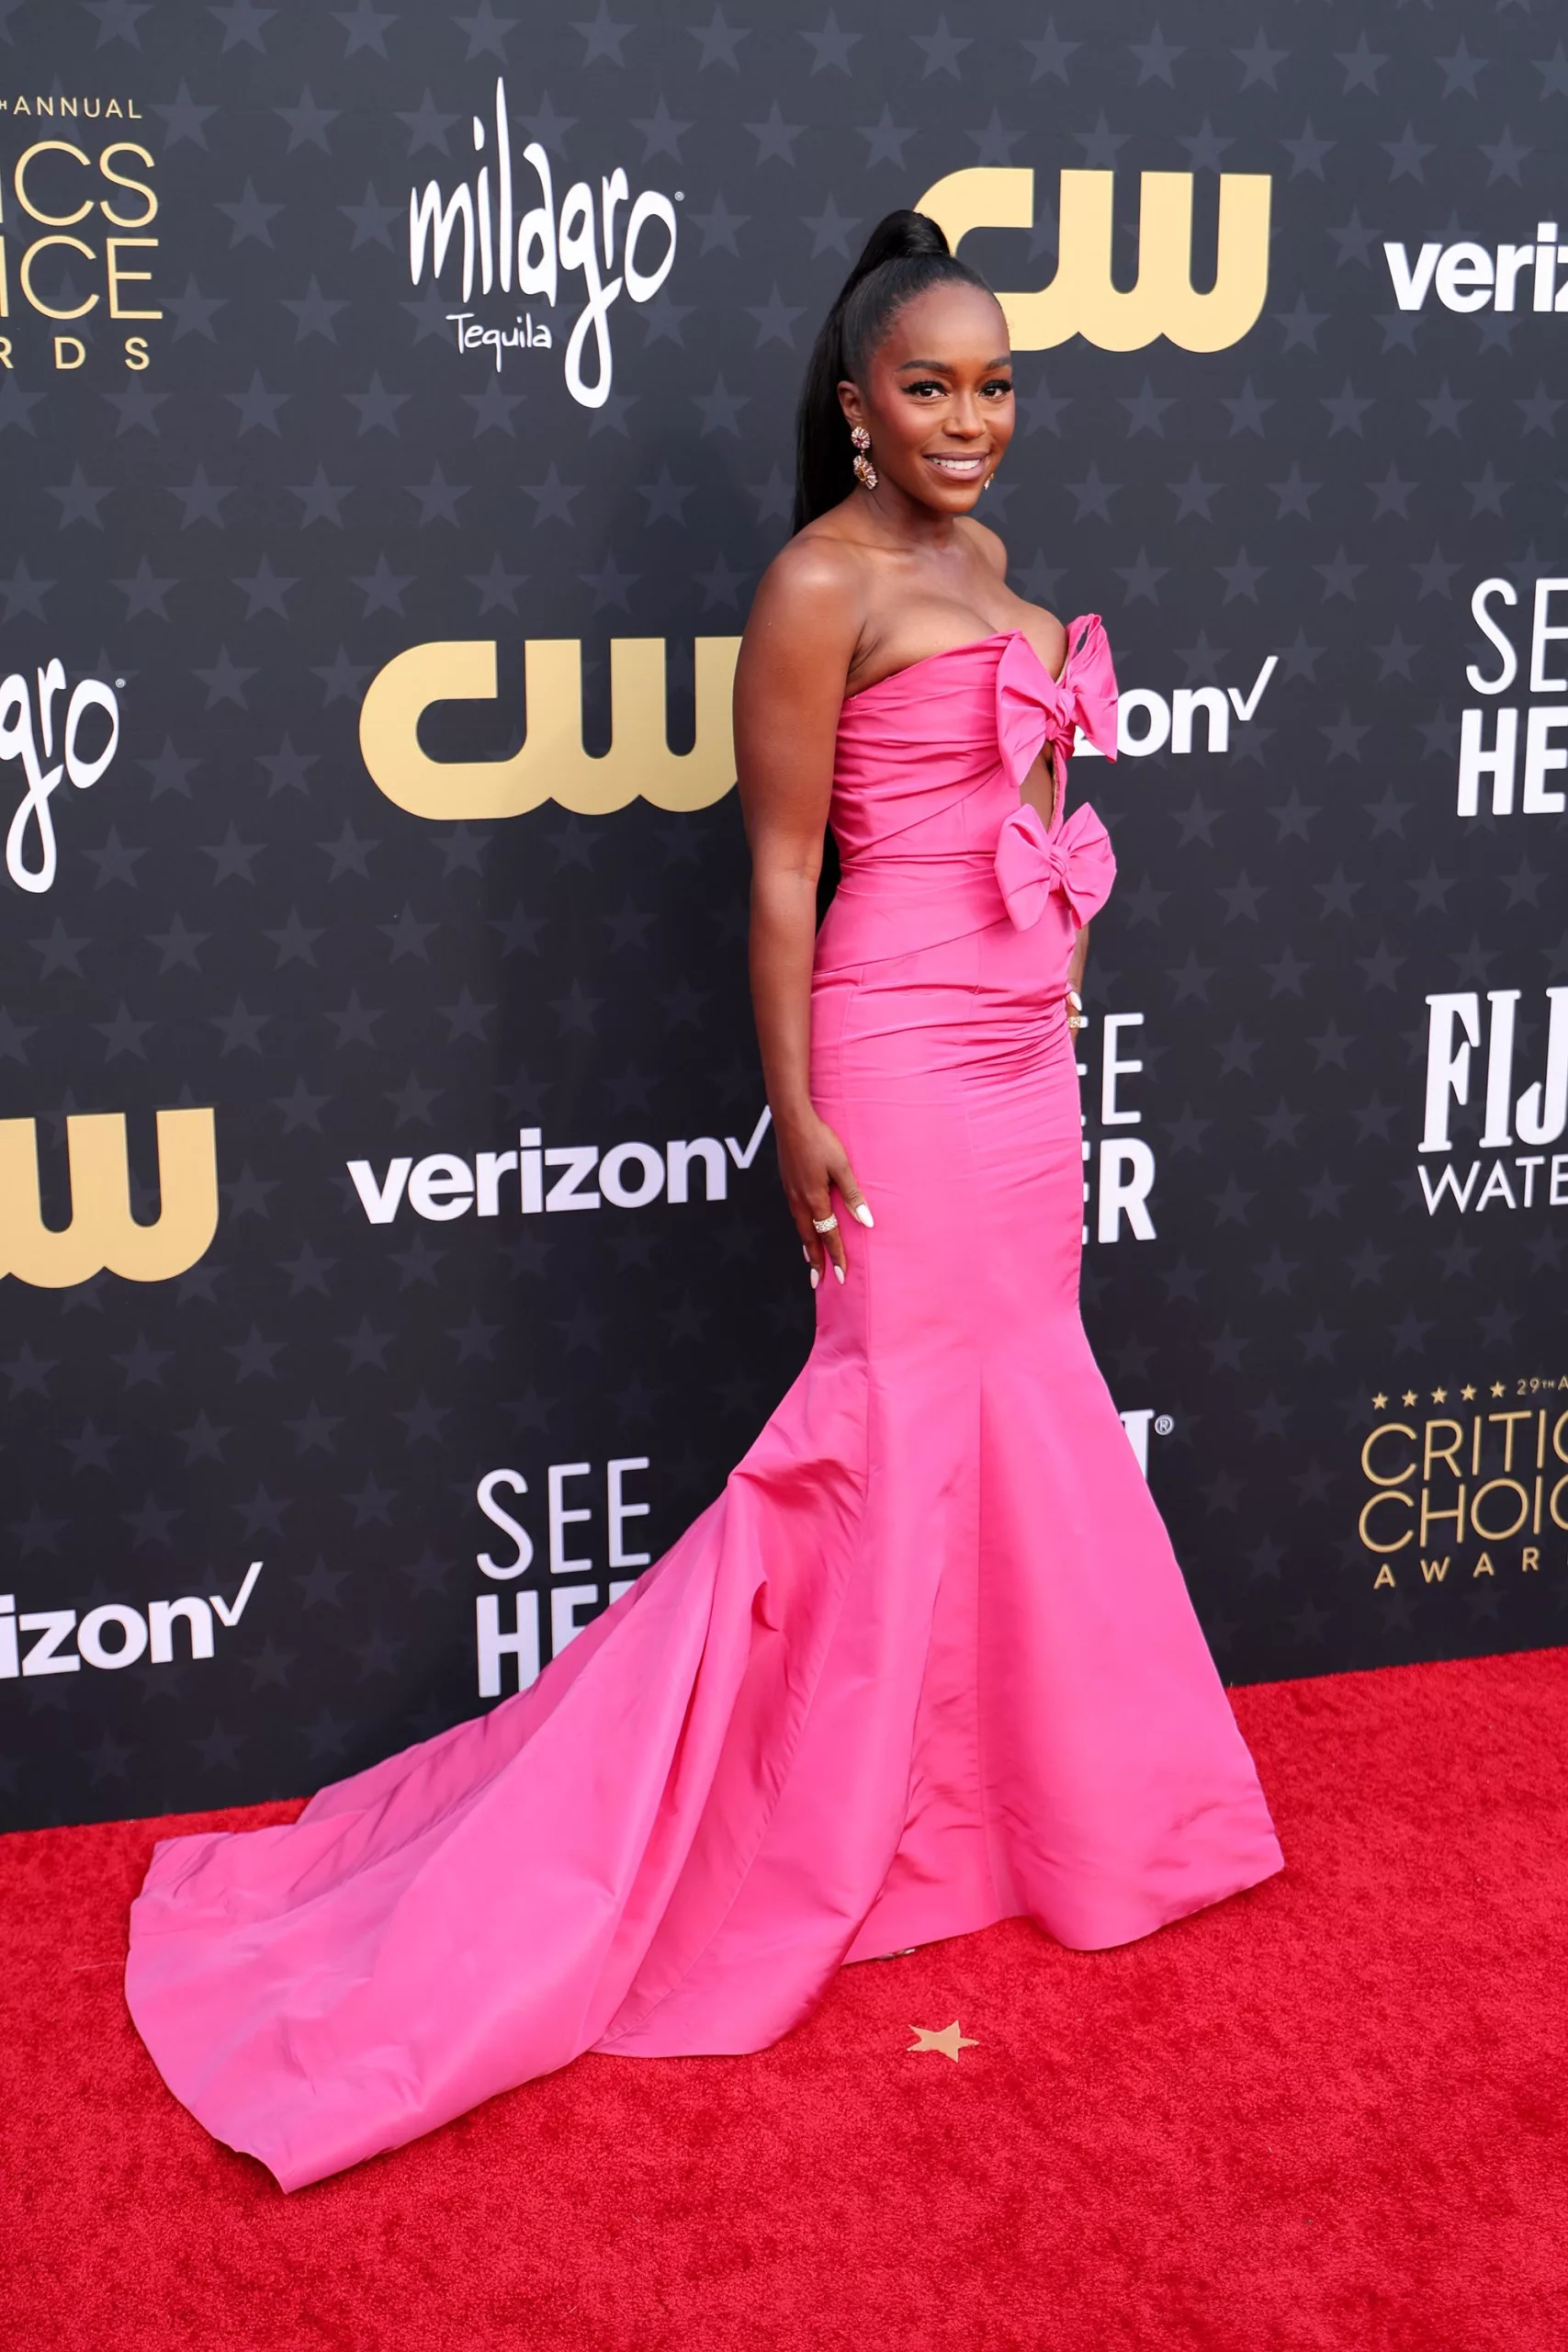 “Lessons in Chemistry” actress Aja Naomi King in a bright pink Oscar de la Renta mermaid gown with oversized pink bow accents and cut-out bodice.